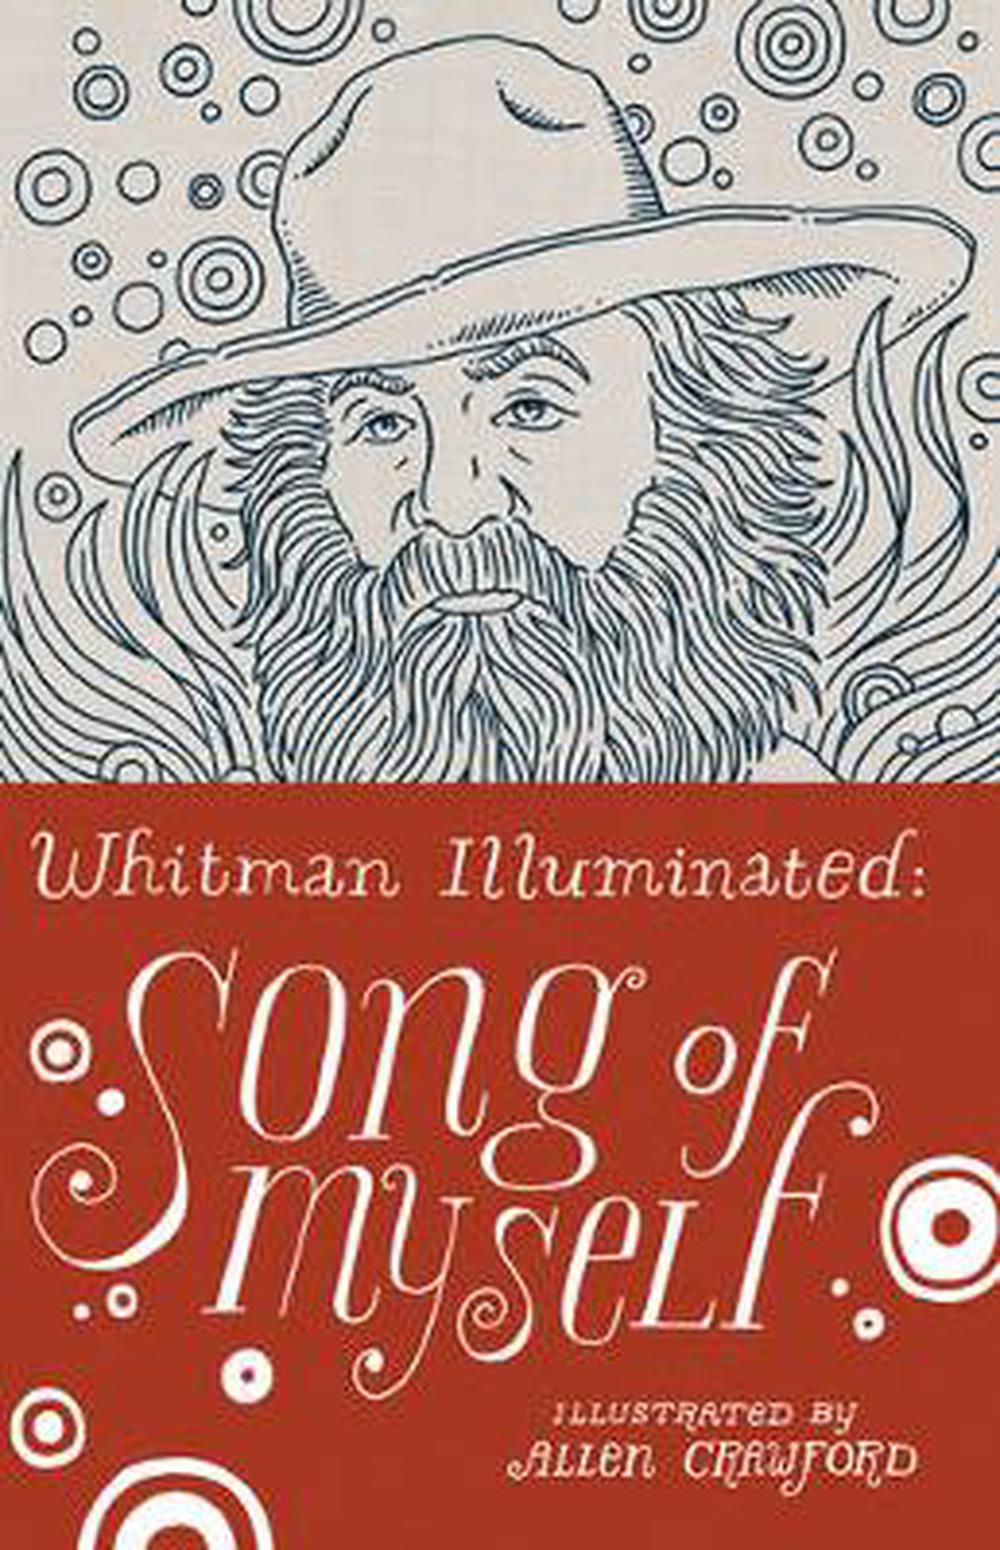 walt whitman leaves of grass song of myself